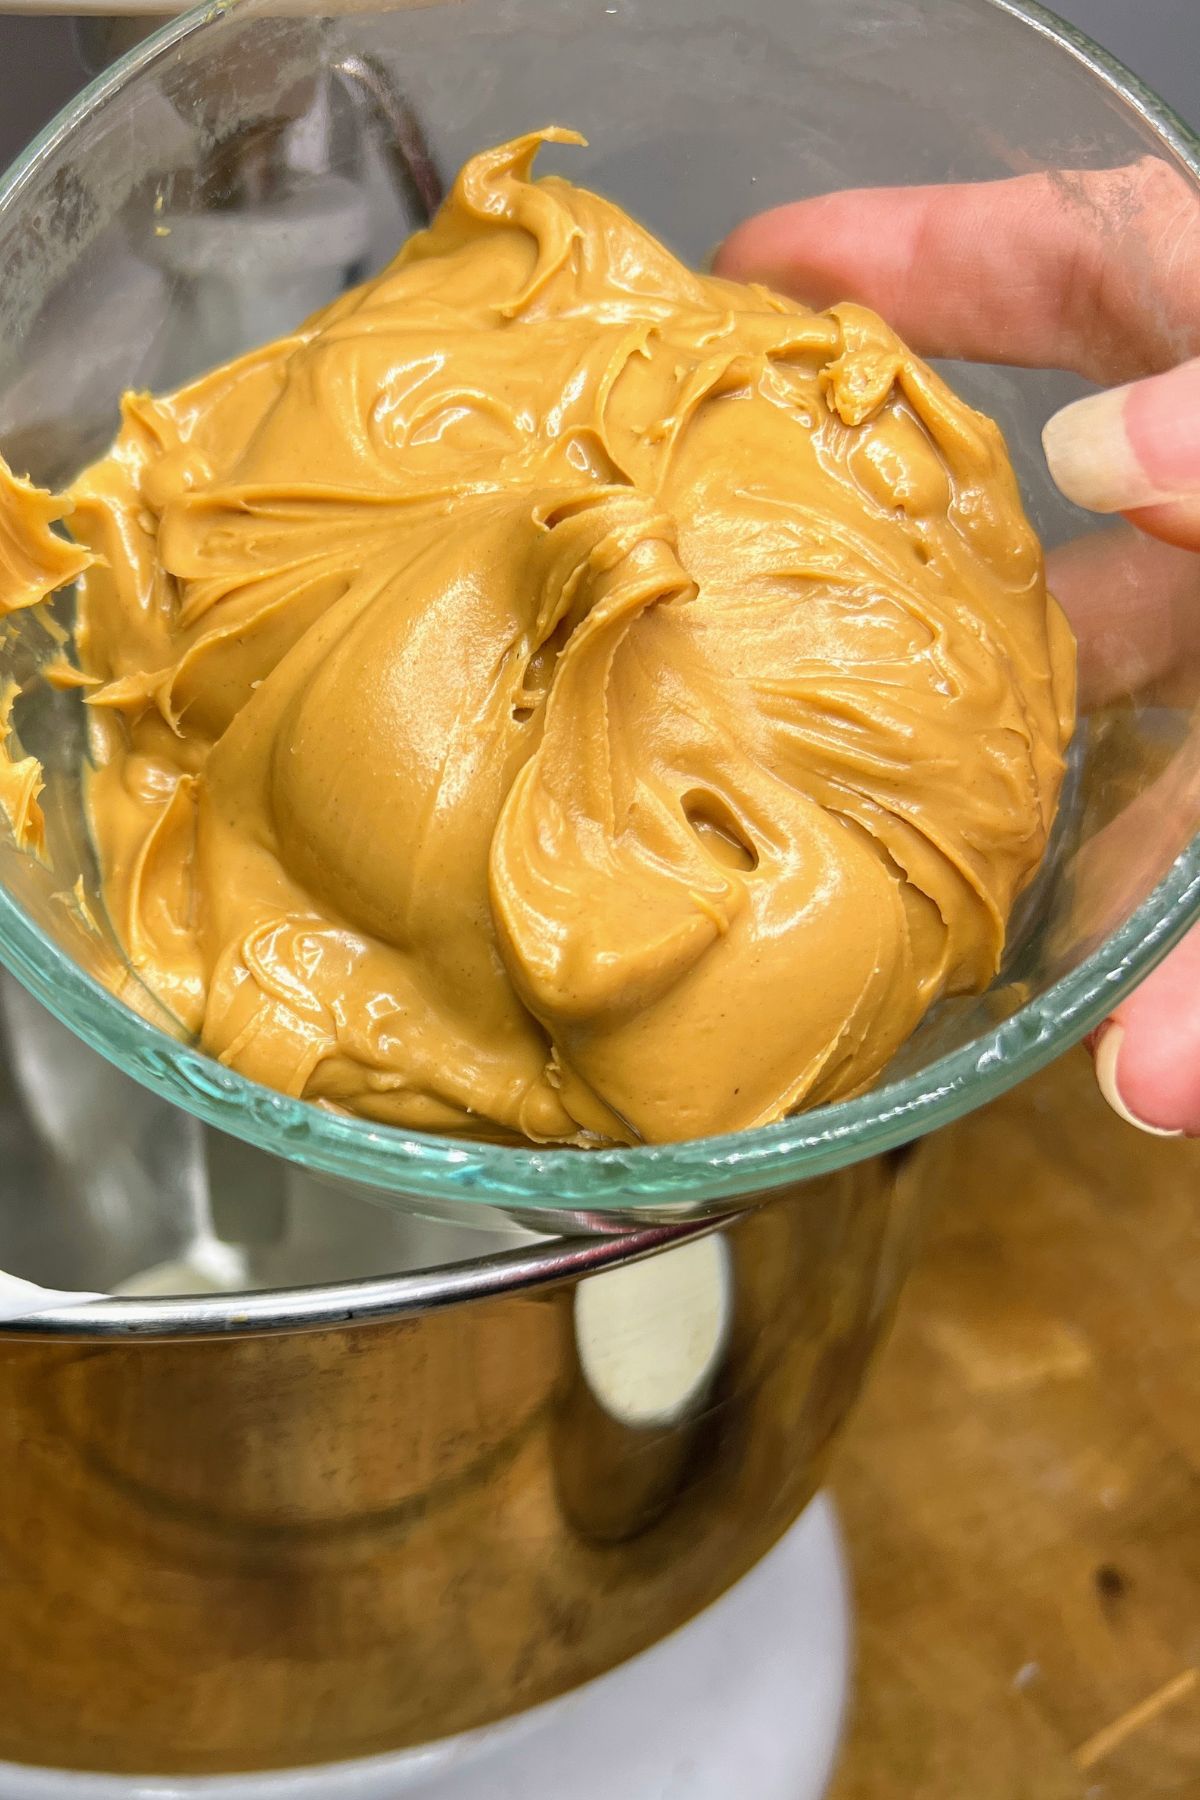 A bowl full of peanut butter being held up.